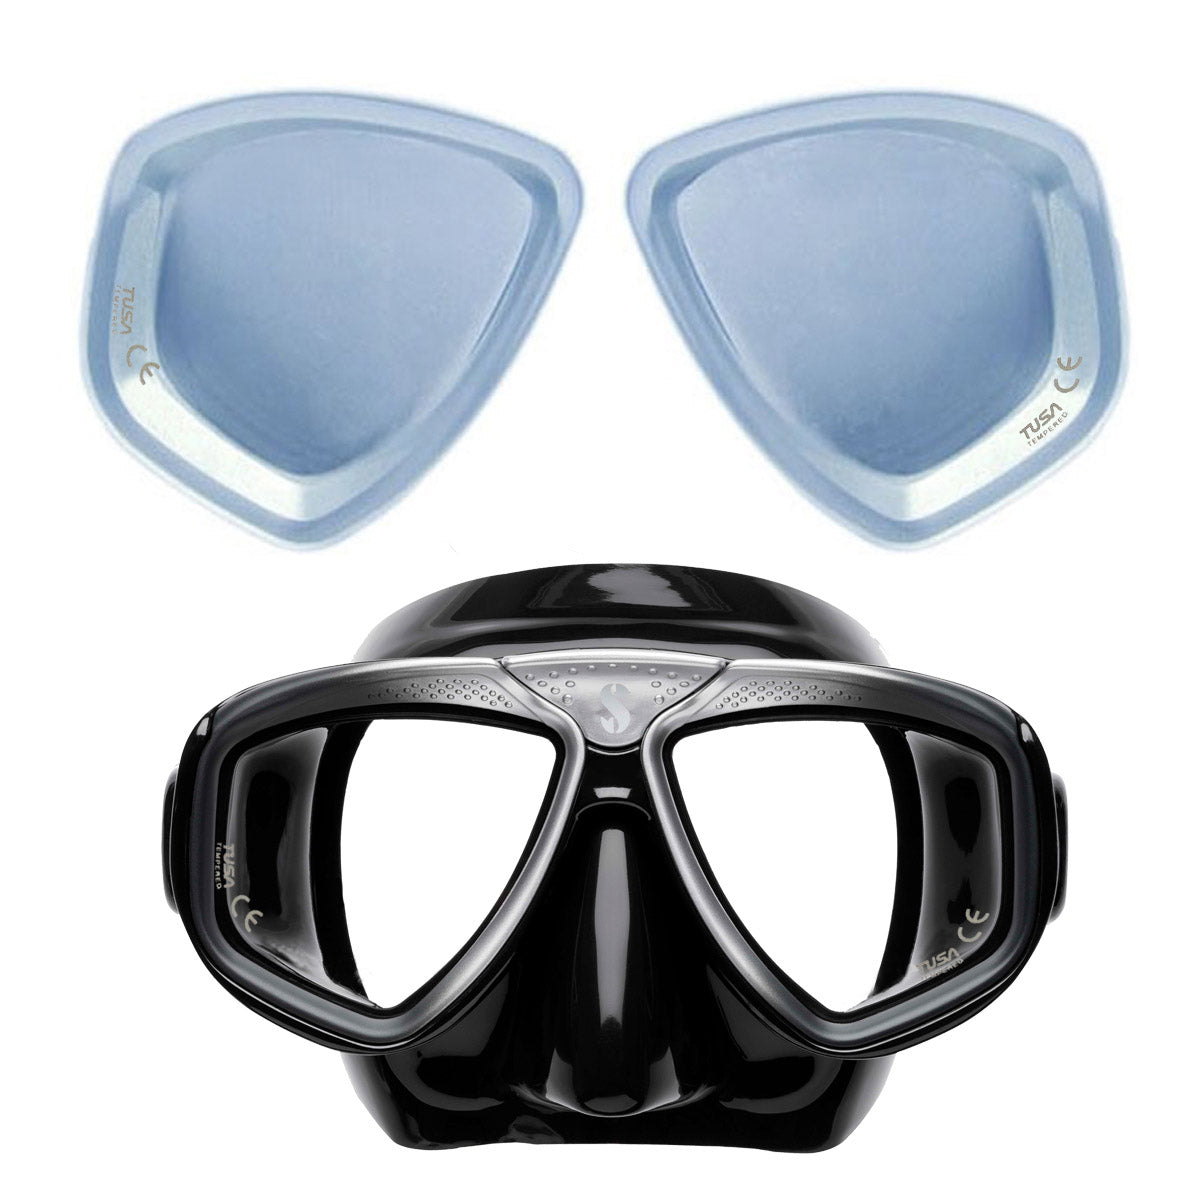 Tusa Corrective Lens Fits most diving mask with drop-shaped lenses